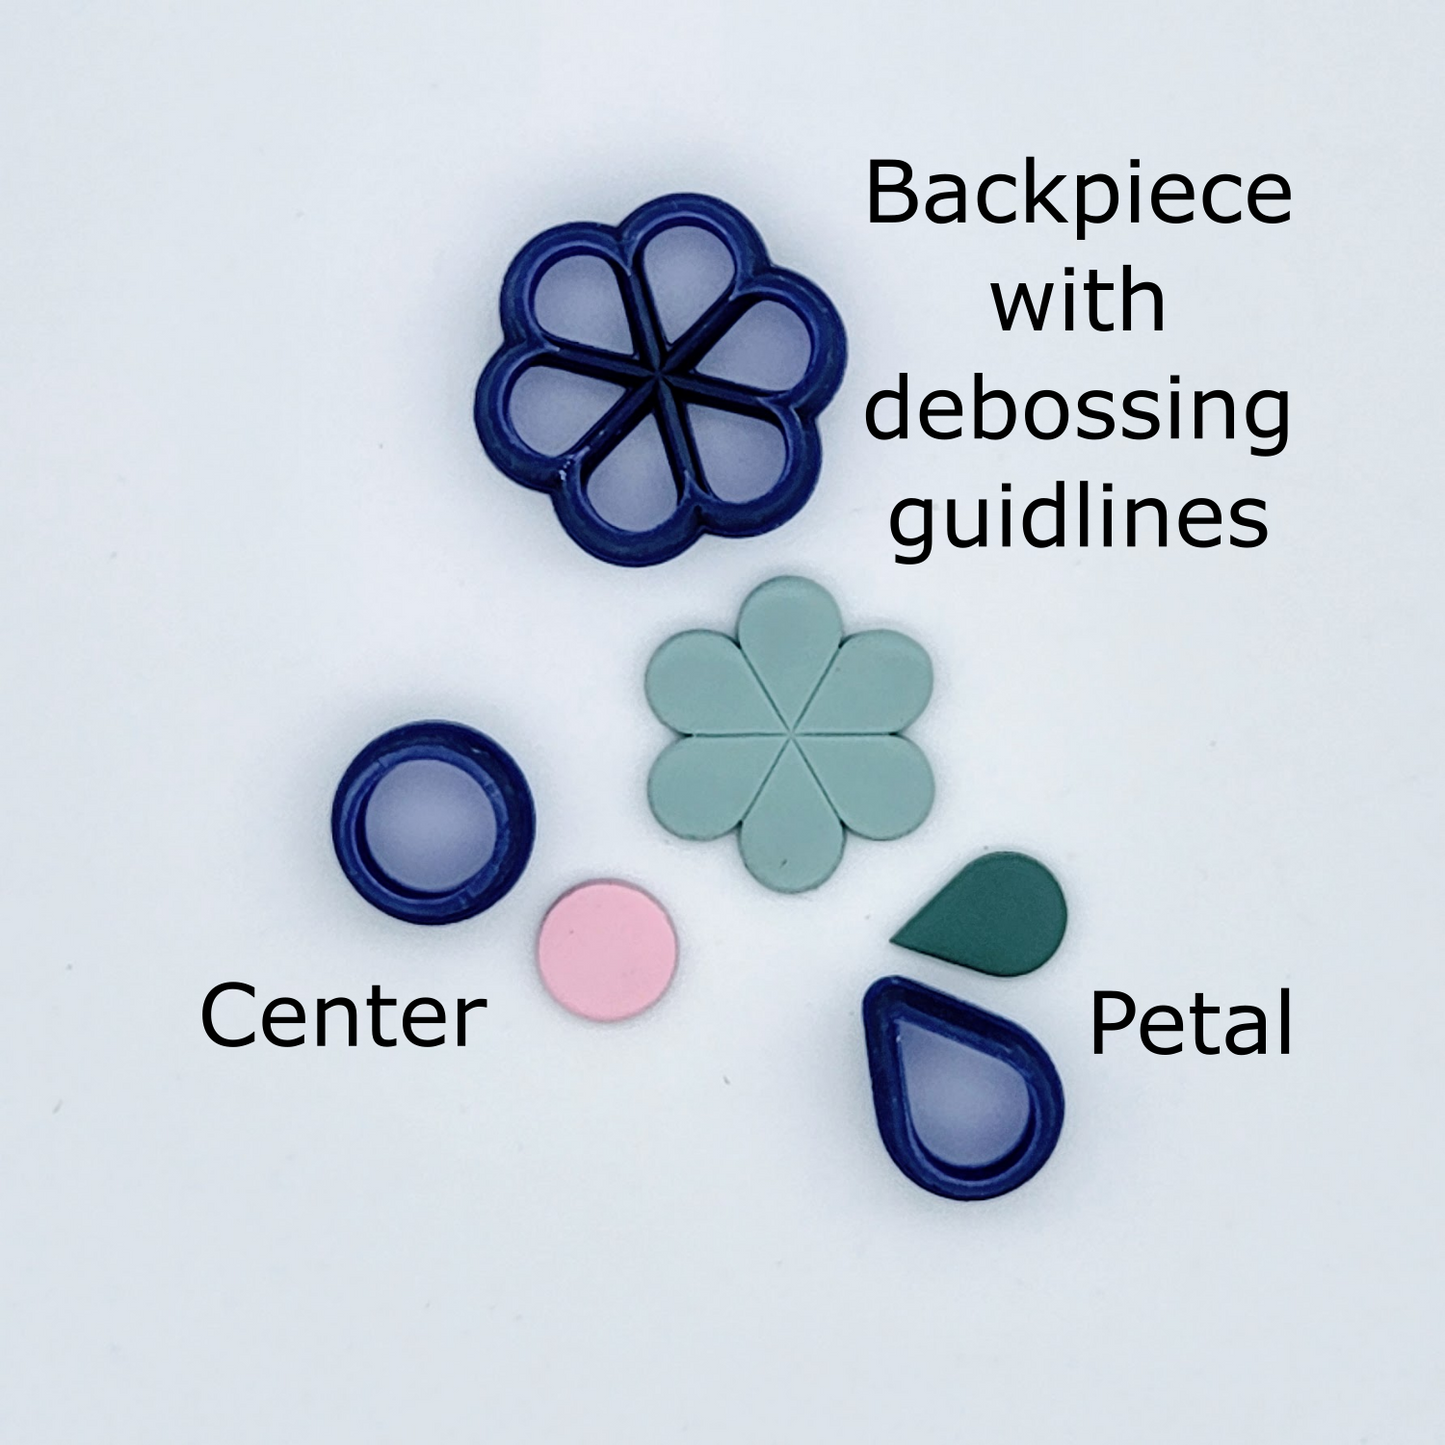 This Teardrop Daisy Cutter Set includes one debossing daisy cutter back piece, one circular center cutter, and a teardrop cutter for the petals. In photo is parts guide and sample for reference